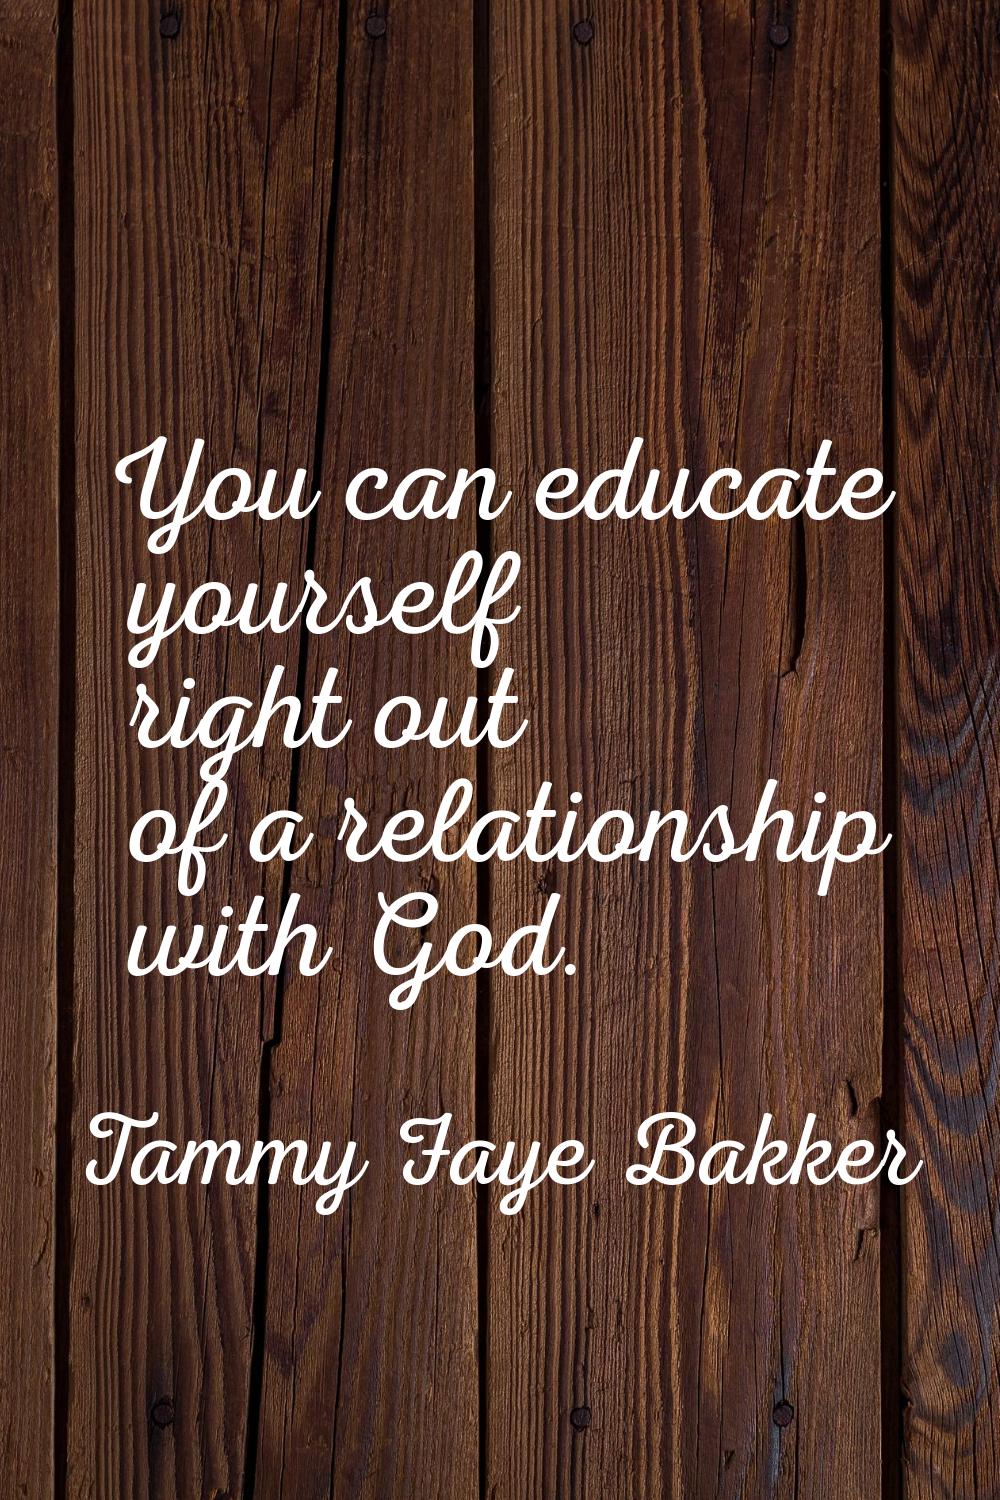 You can educate yourself right out of a relationship with God.